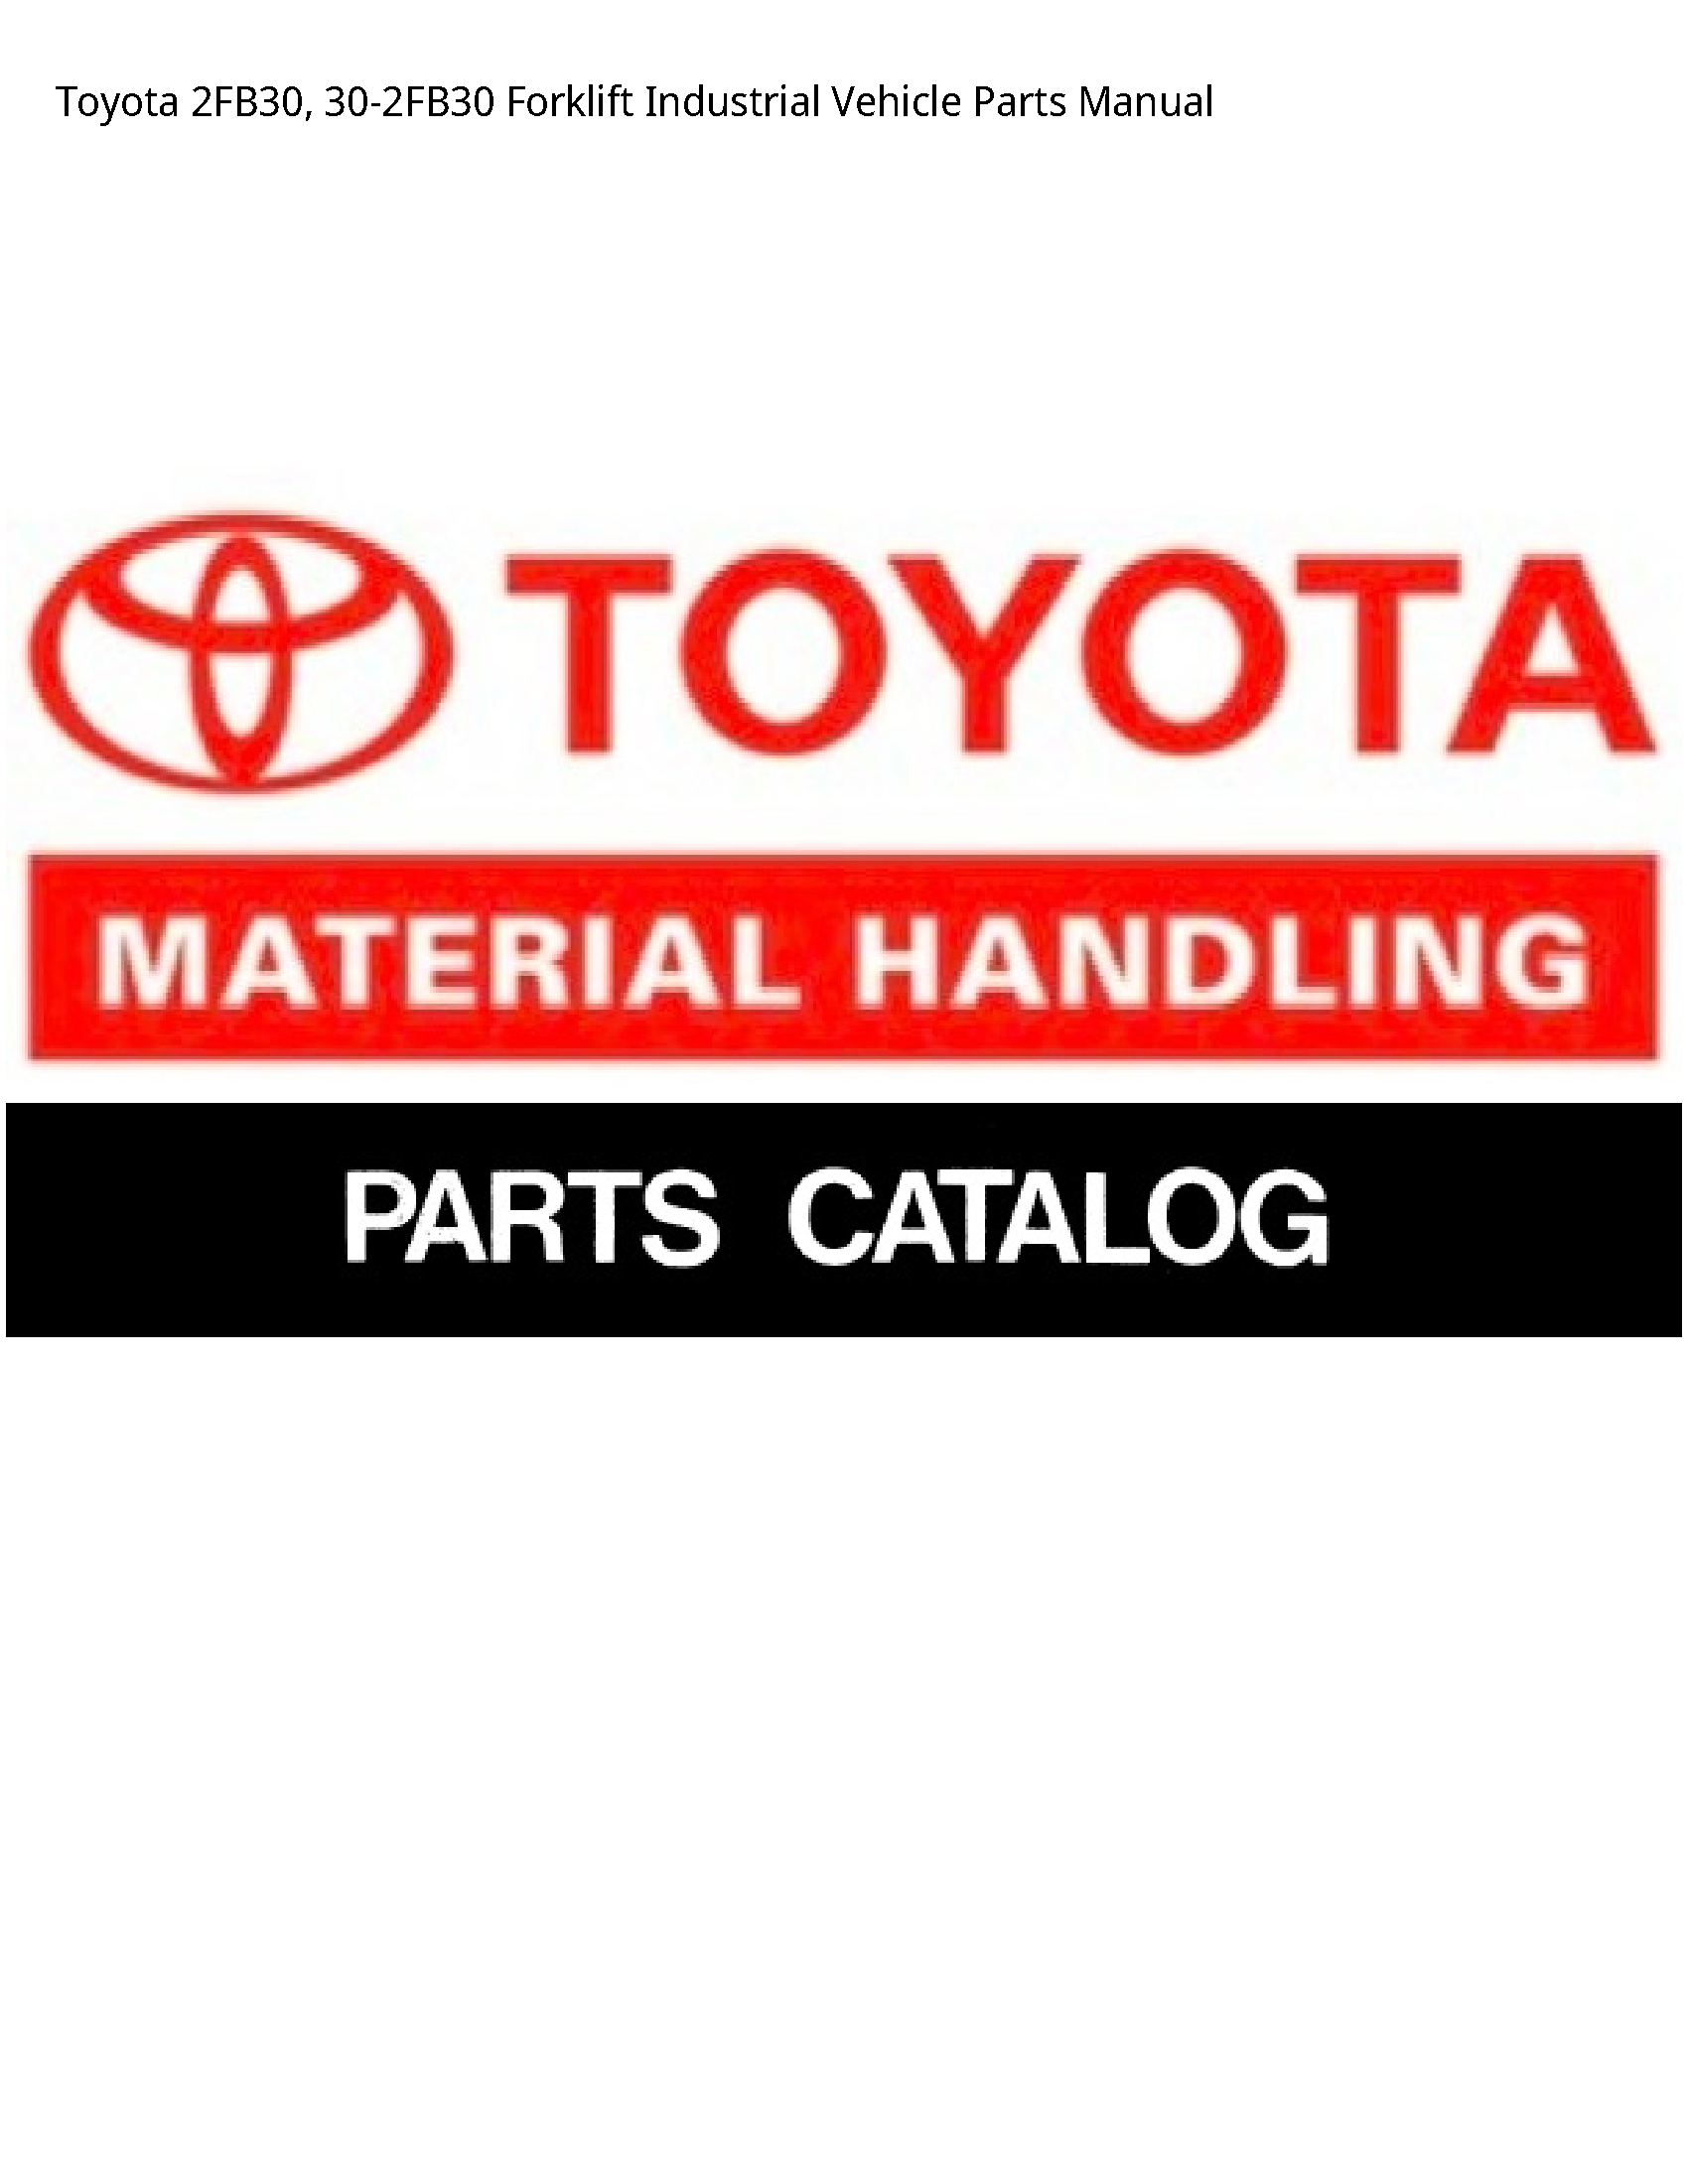 Toyota 2FB30 Forklift Industrial Vehicle Parts manual